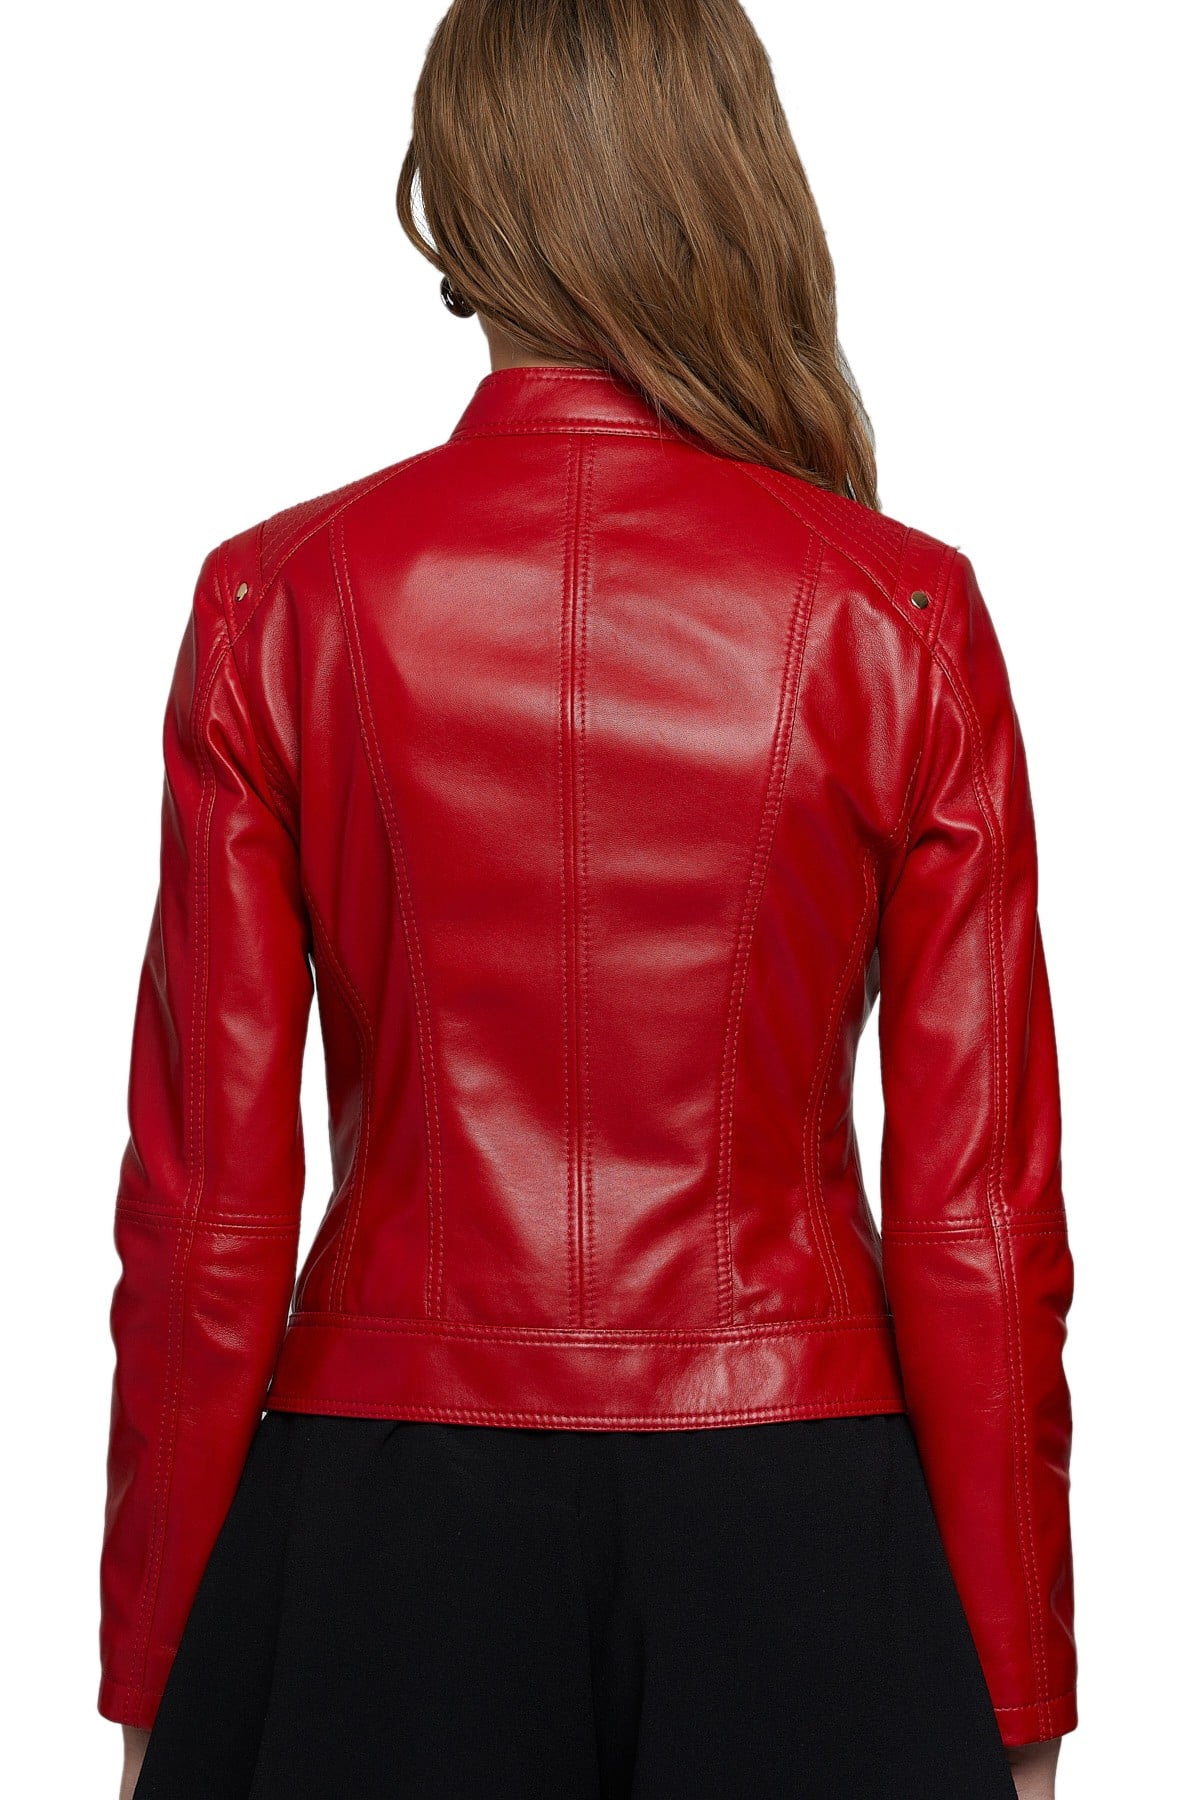 Emily Canham Women's 100 % Real Red Leather Sport Style Jacket